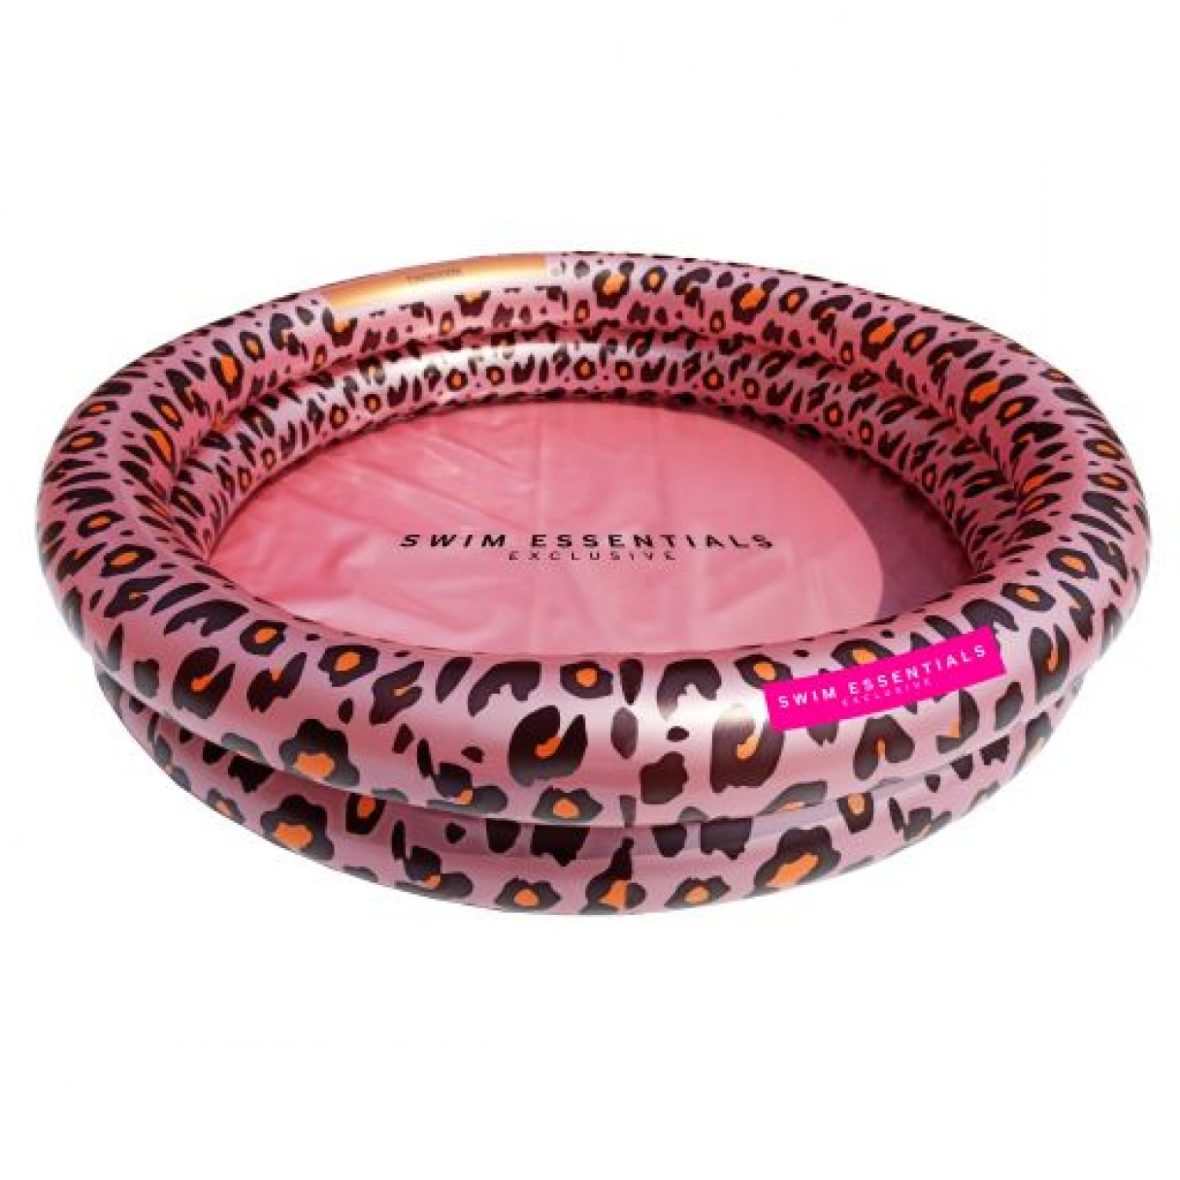 Essentials – Rose Gold Leopard Printed Baby Pool 60 cm 2 ring